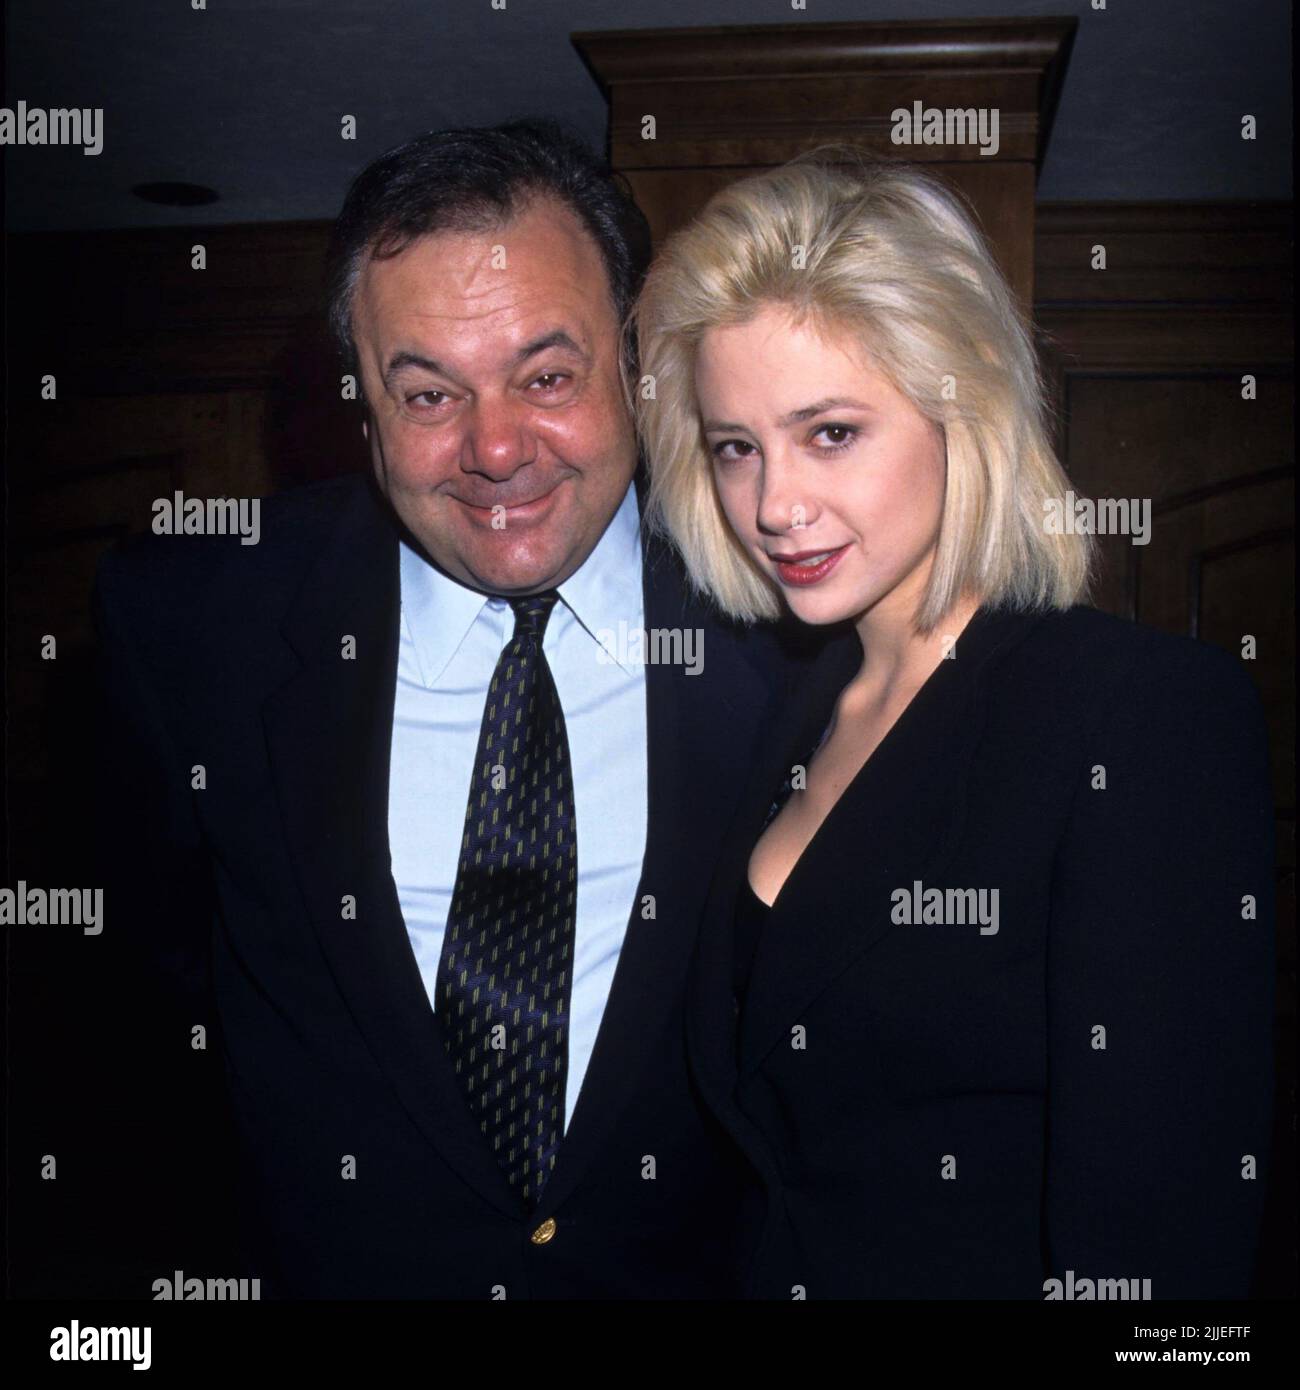 PAUL SORVINO (April 13, 1939 - July 25, 2022) was an American actor, opera singer, businessman, writer, and sculptor. He often portrayed authority figures on both sides of the law and was known for his roles in the 1990 gangster film 'Goodfellas', and the TV series 'Law & Order'. FILE PHOTO: Los Angeles, California, USA: PAUL SORVINO with daughter MIRA SORVINO at the 1996 Broadcast Film Critics Awards. (Credit Image: © Lisa Rose/ZUMA Wire) Stock Photo